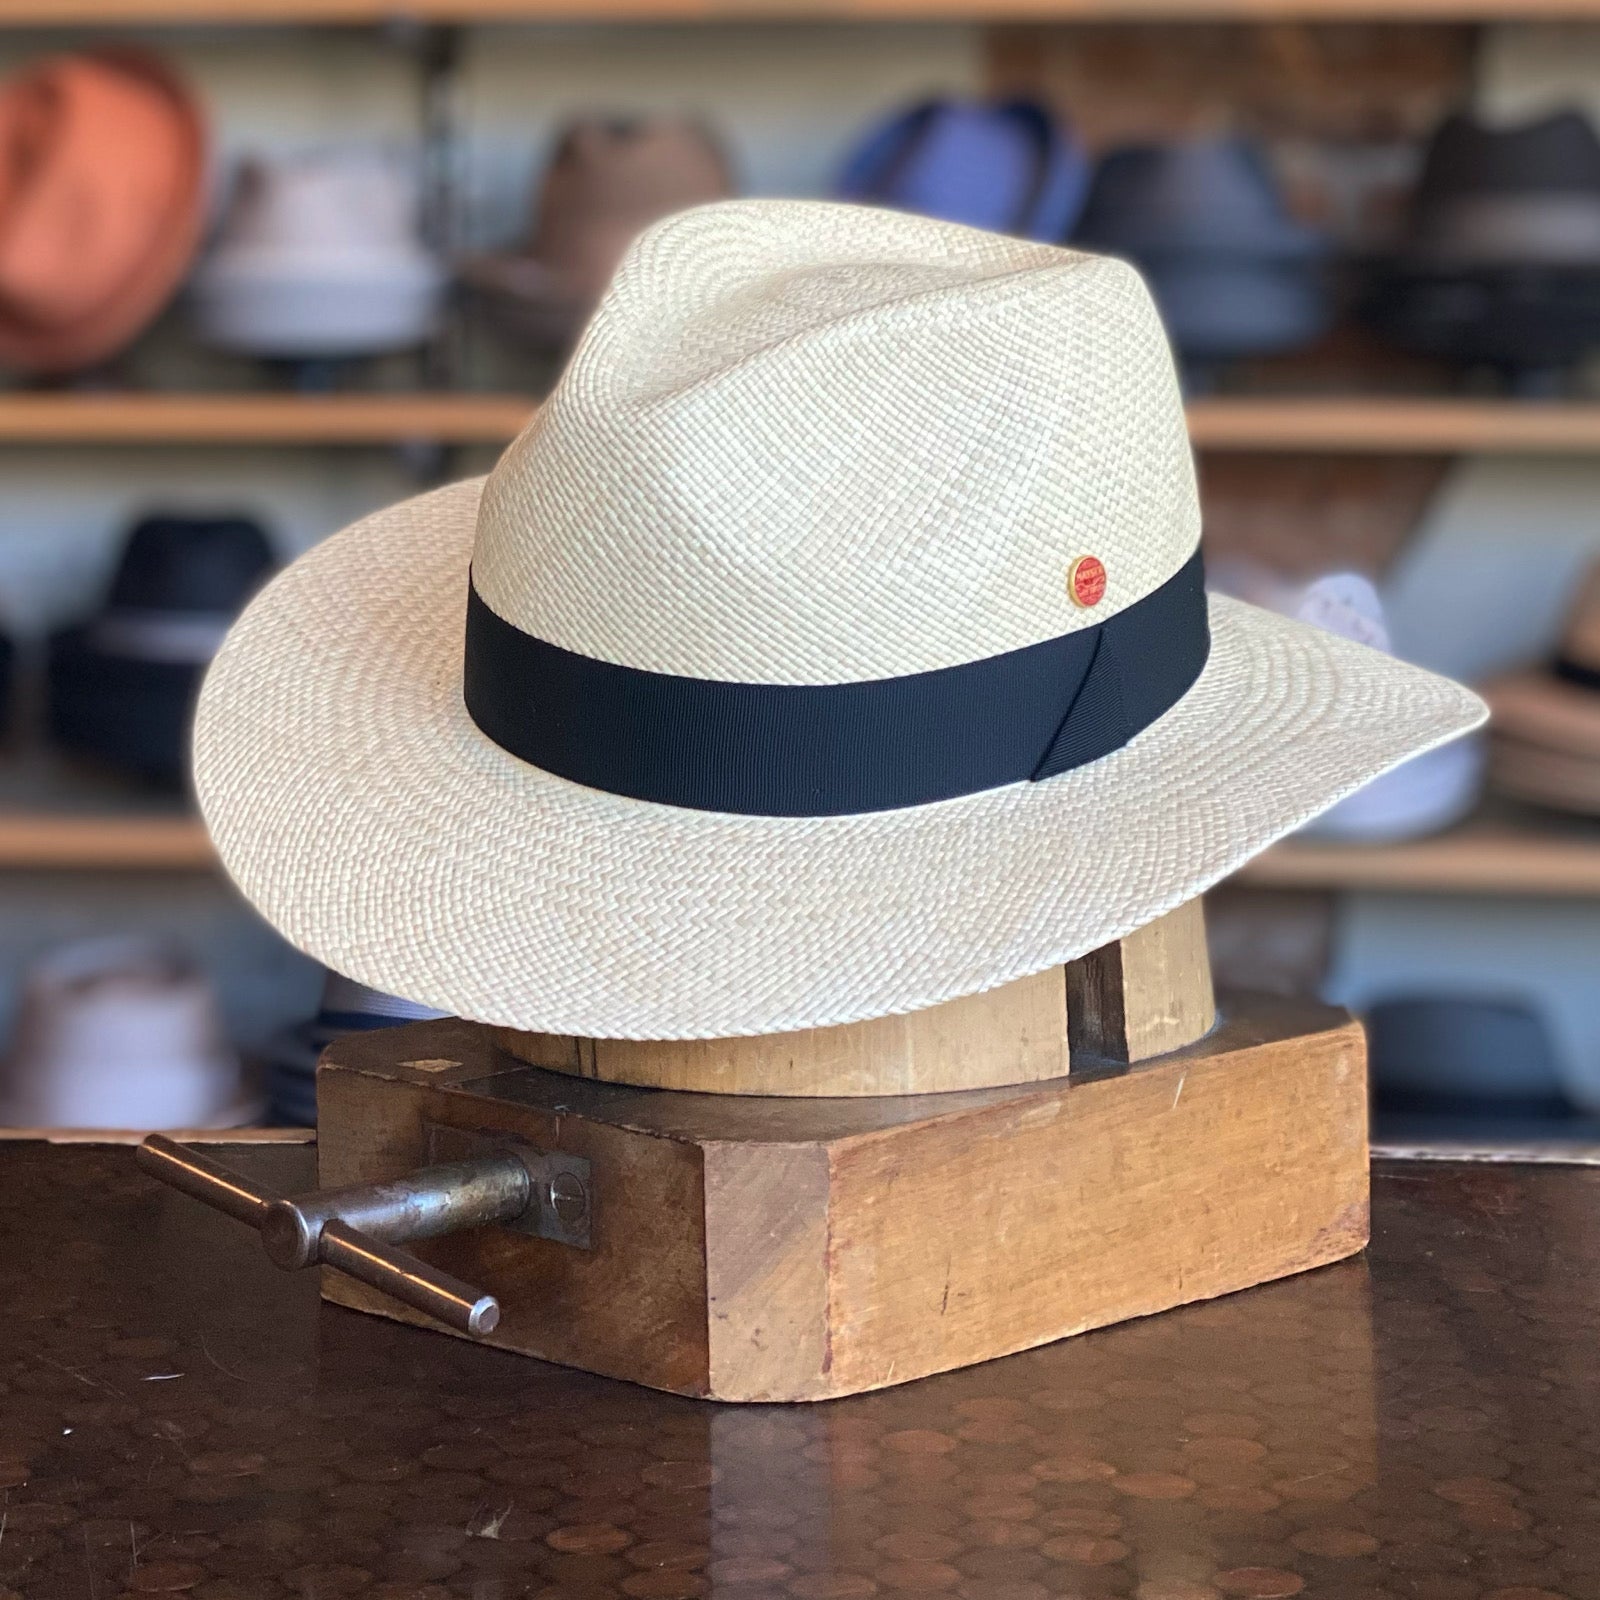 Can be rolls up for packing -Handmade panama hat-Gedeon Hatbor